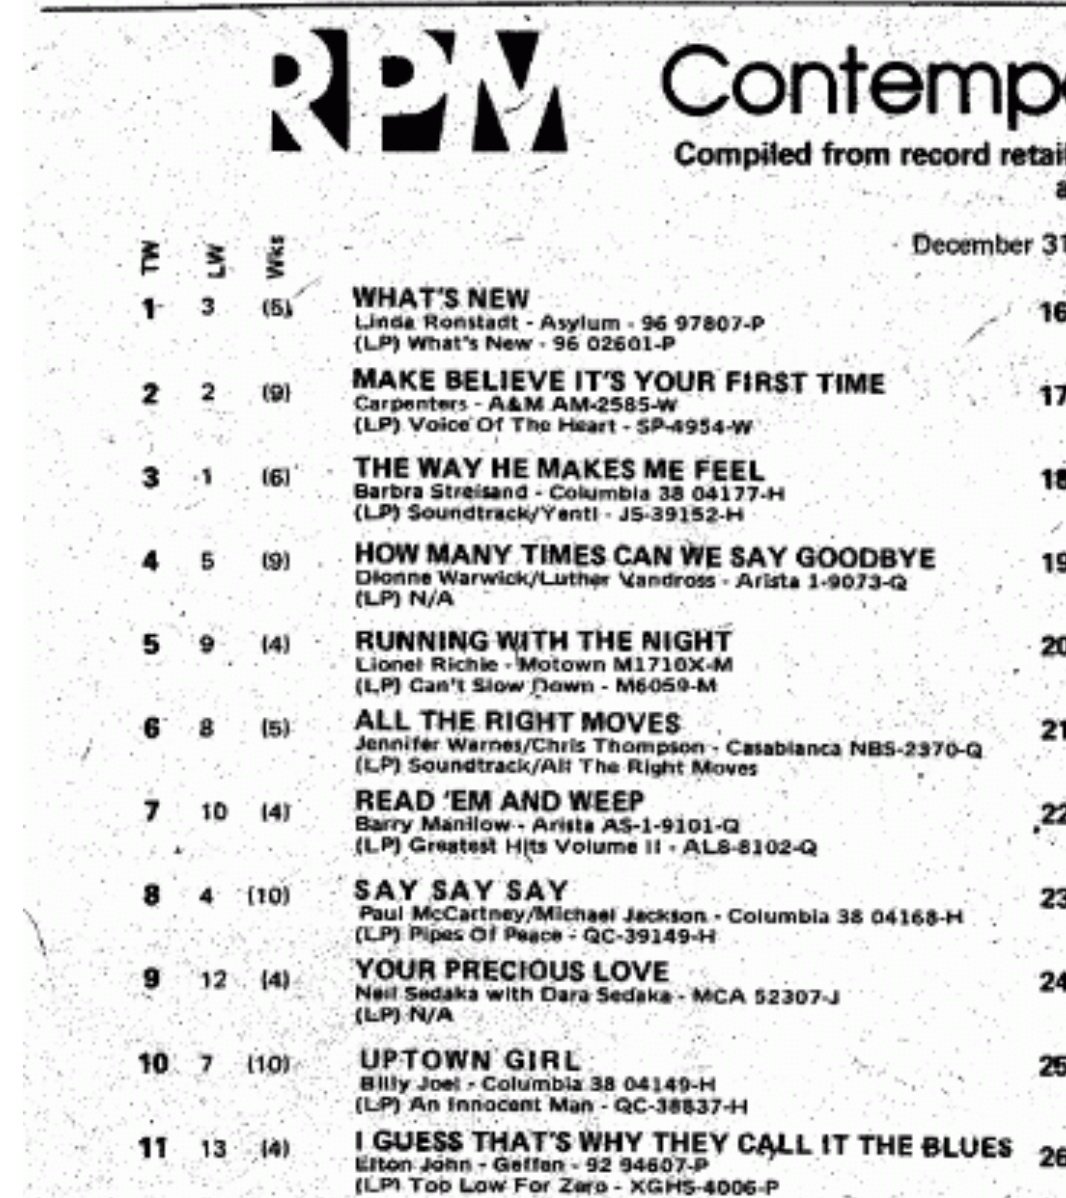 The #Carpenters 'Make Believe it's Your First Time' reached #2 on the Canadian #AdultContemporary chart New Year's week back in 1984.

An amazing list of artists on the chart that week!

Top 5 inc. Linda Ronstadt, Barbra Streisand, Dionne Warwick/Luther Vandross, Lionel Richie